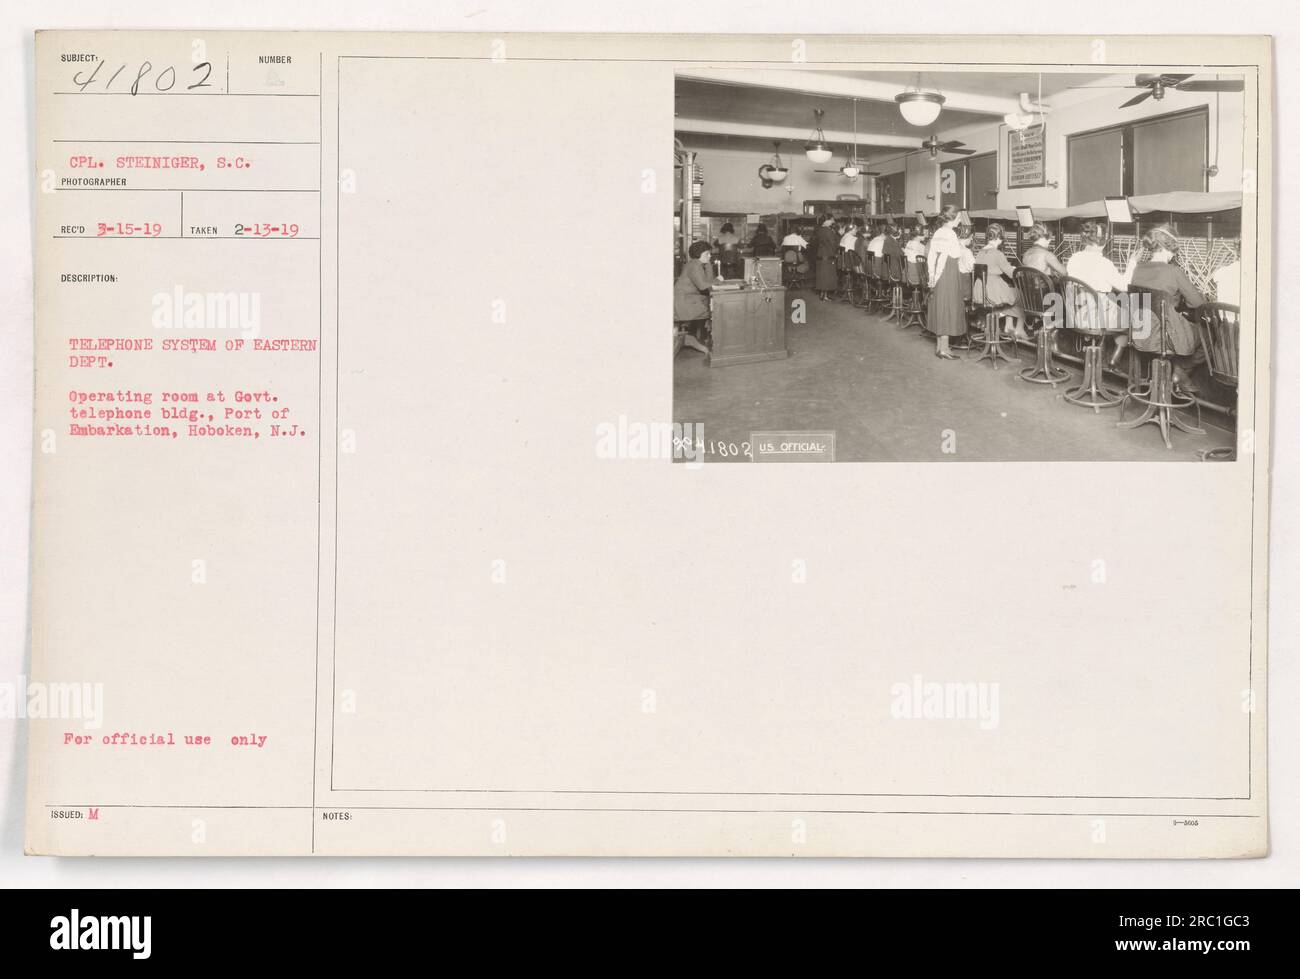 This image shows the operating room at the Government telephone building in the Port of Embarkation, Hoboken, New Jersey. It is part of the telephone system of the Eastern Department. Photographer S.C. Steiniger took this photo on February 13, 1919. For official use only. Stock Photo